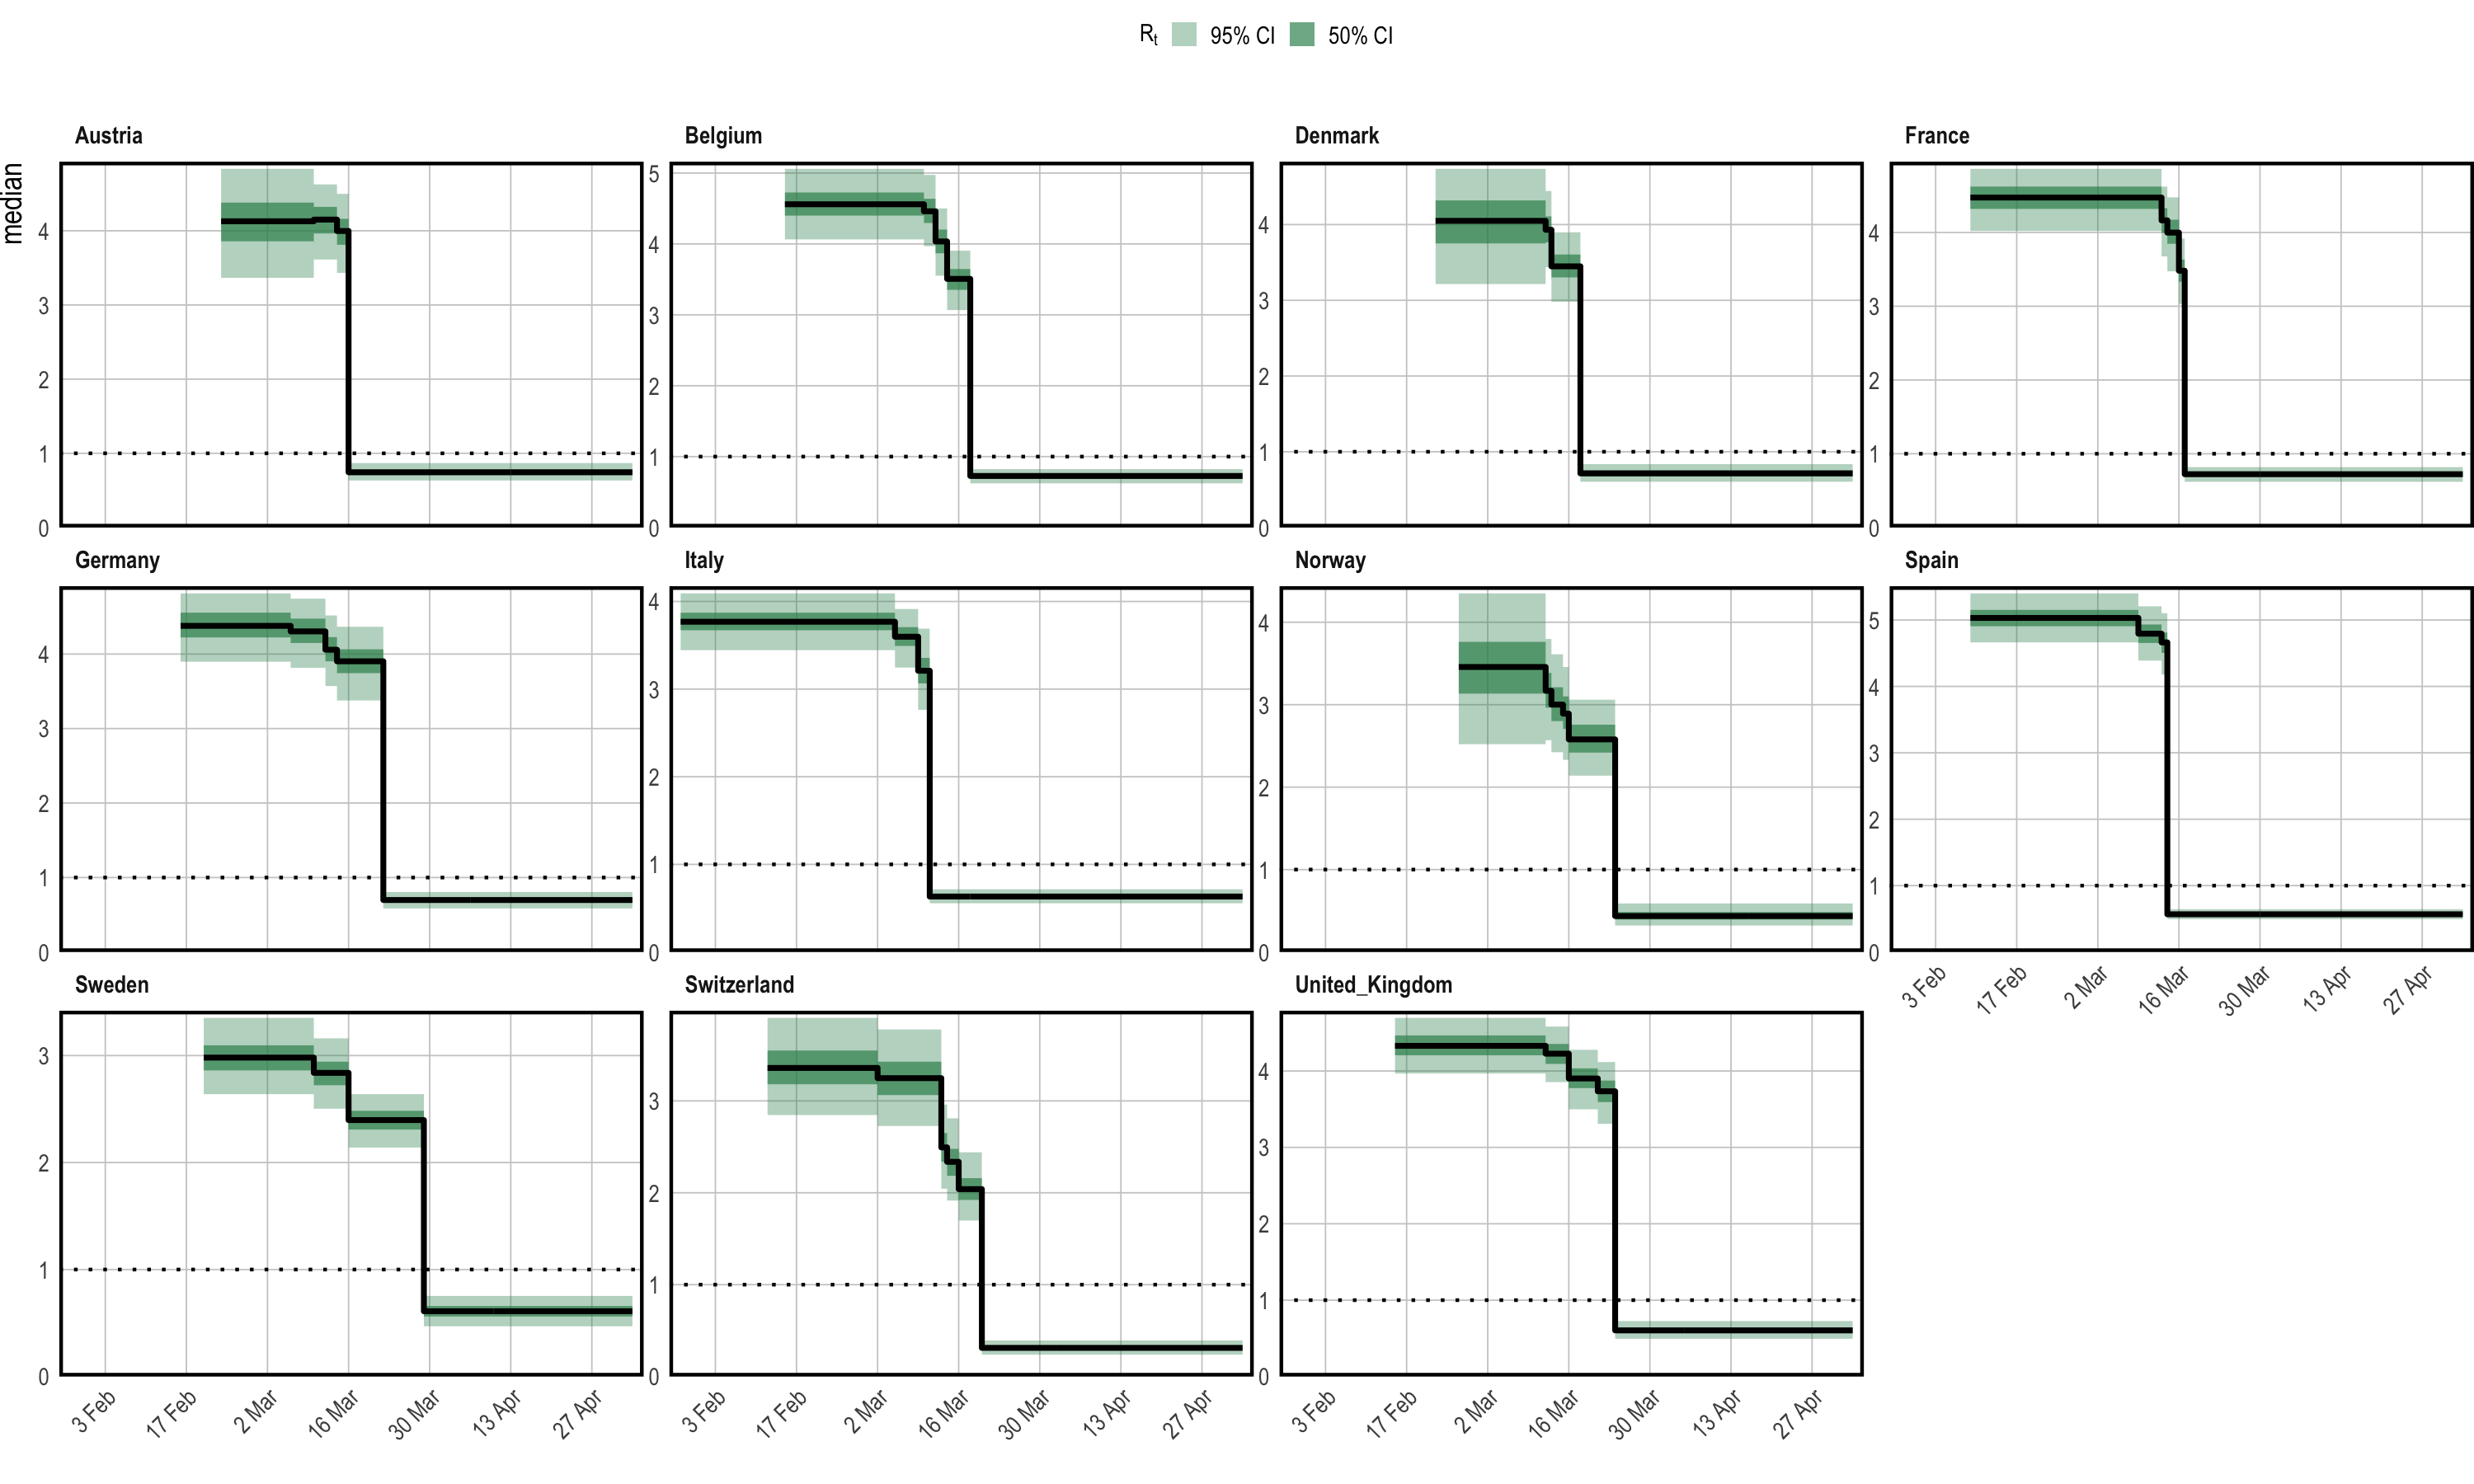 Inferred reproduction numbers in each country. Credible intervals from the posterior are plotted in shades of green, in addition to the posterior median in black. Each panel shows the data for a single country.